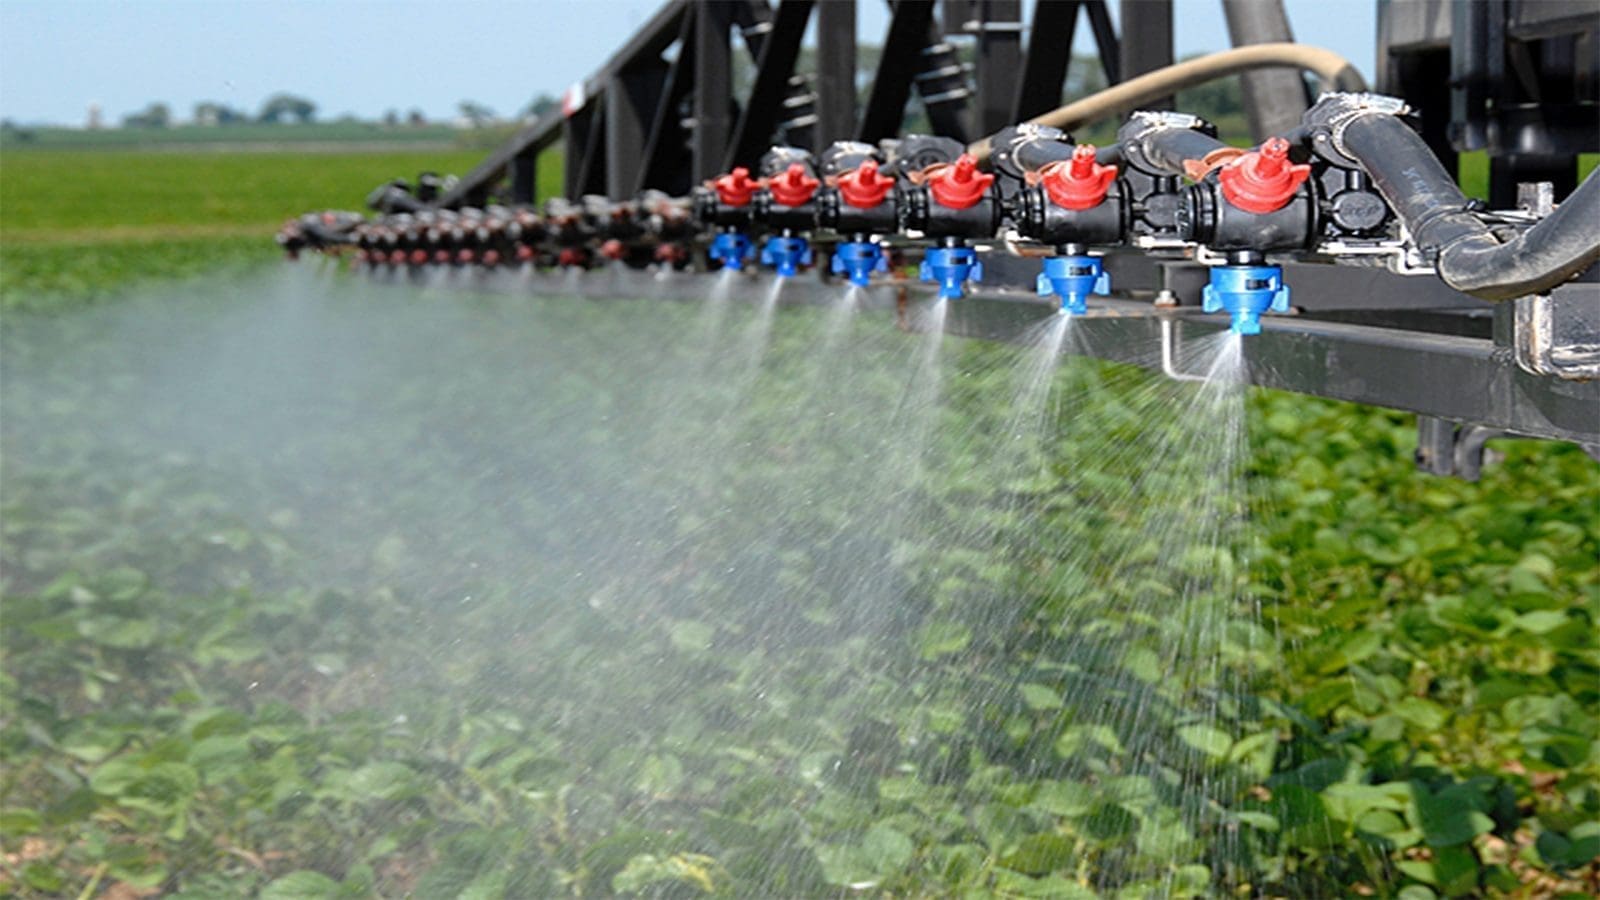 Lawsuit filed against EPA for unlawful re-approval of toxic herbicides in food agriculture